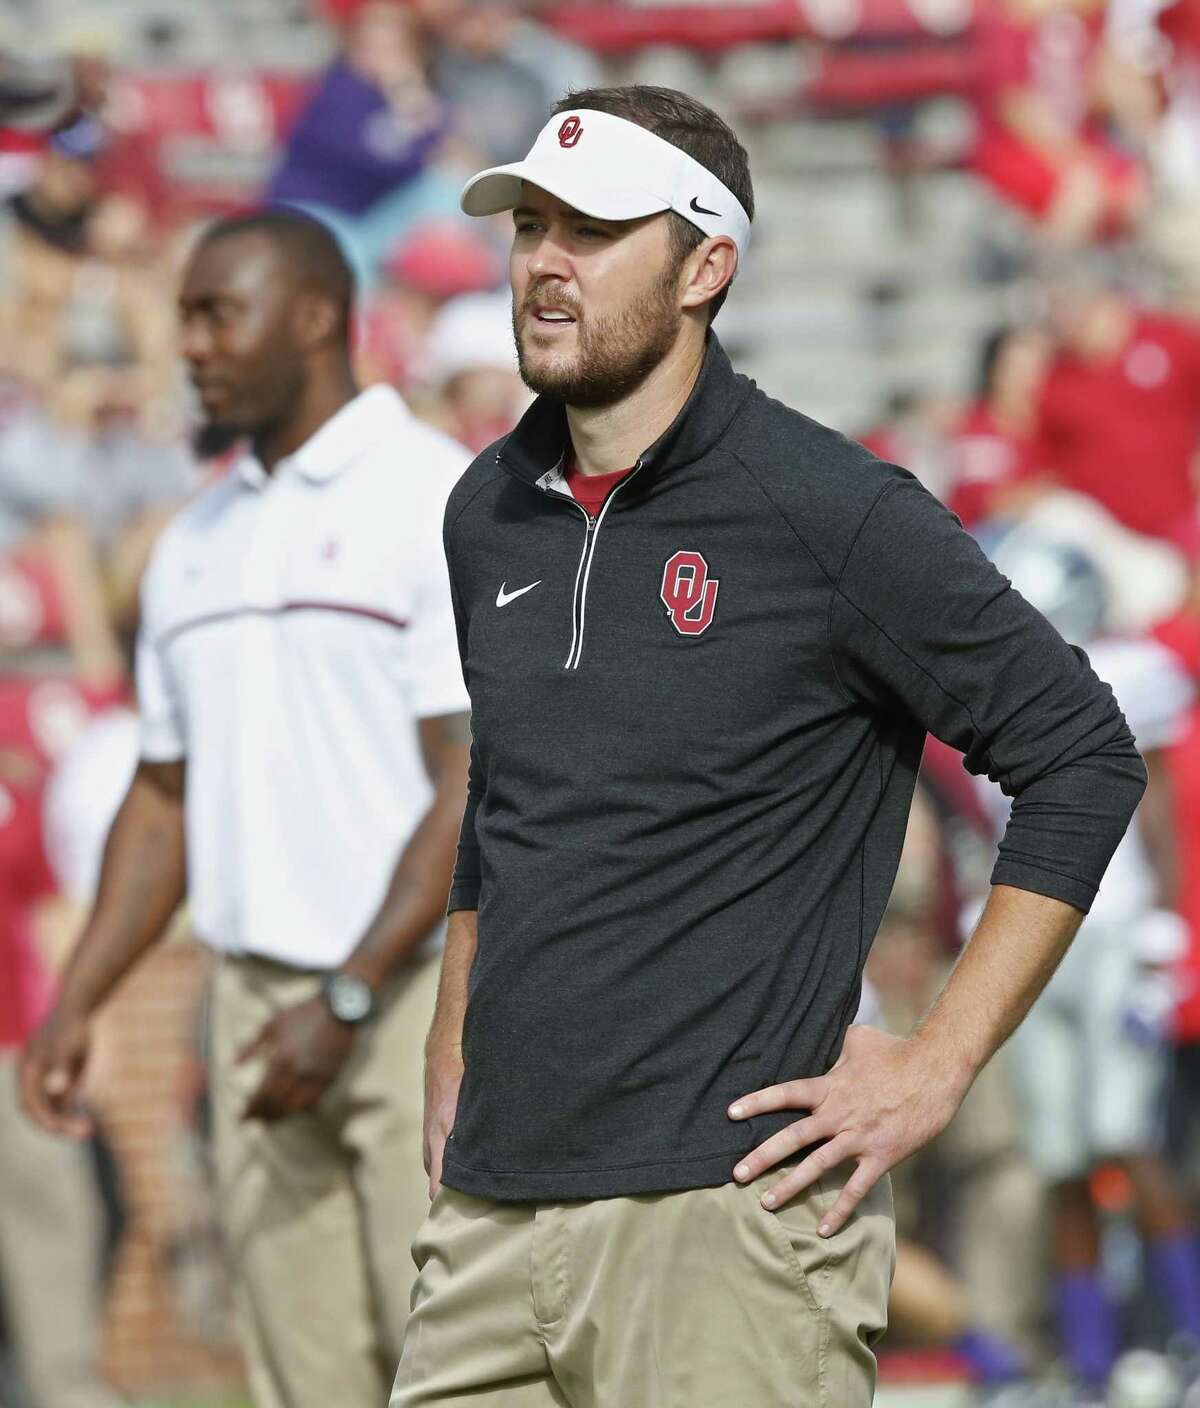 File-This Oct. 15, 2016, file photo shows Oklahoma offensive coordinator Lincoln Riley before an NCAA college football game between Kansas State and Oklahoma in Norman, Okla. LeachÂ?’s former Tech quarterbacks are gaining prominence as coaches at Big 12 programs. Riley recently was promoted from offensive coordinator to head coach at Oklahoma. Kliff Kingsbury has been the head coach at Texas Tech since 2013, and his offenses have been nearly unstoppable. Sonny Cumbie is entering his fourth season as TCUÂ?’s co-offensive coordinator, and his units with quarterback Trevone Boykin were among the best in college football. (AP Photo/Sue Ogrocki. File)